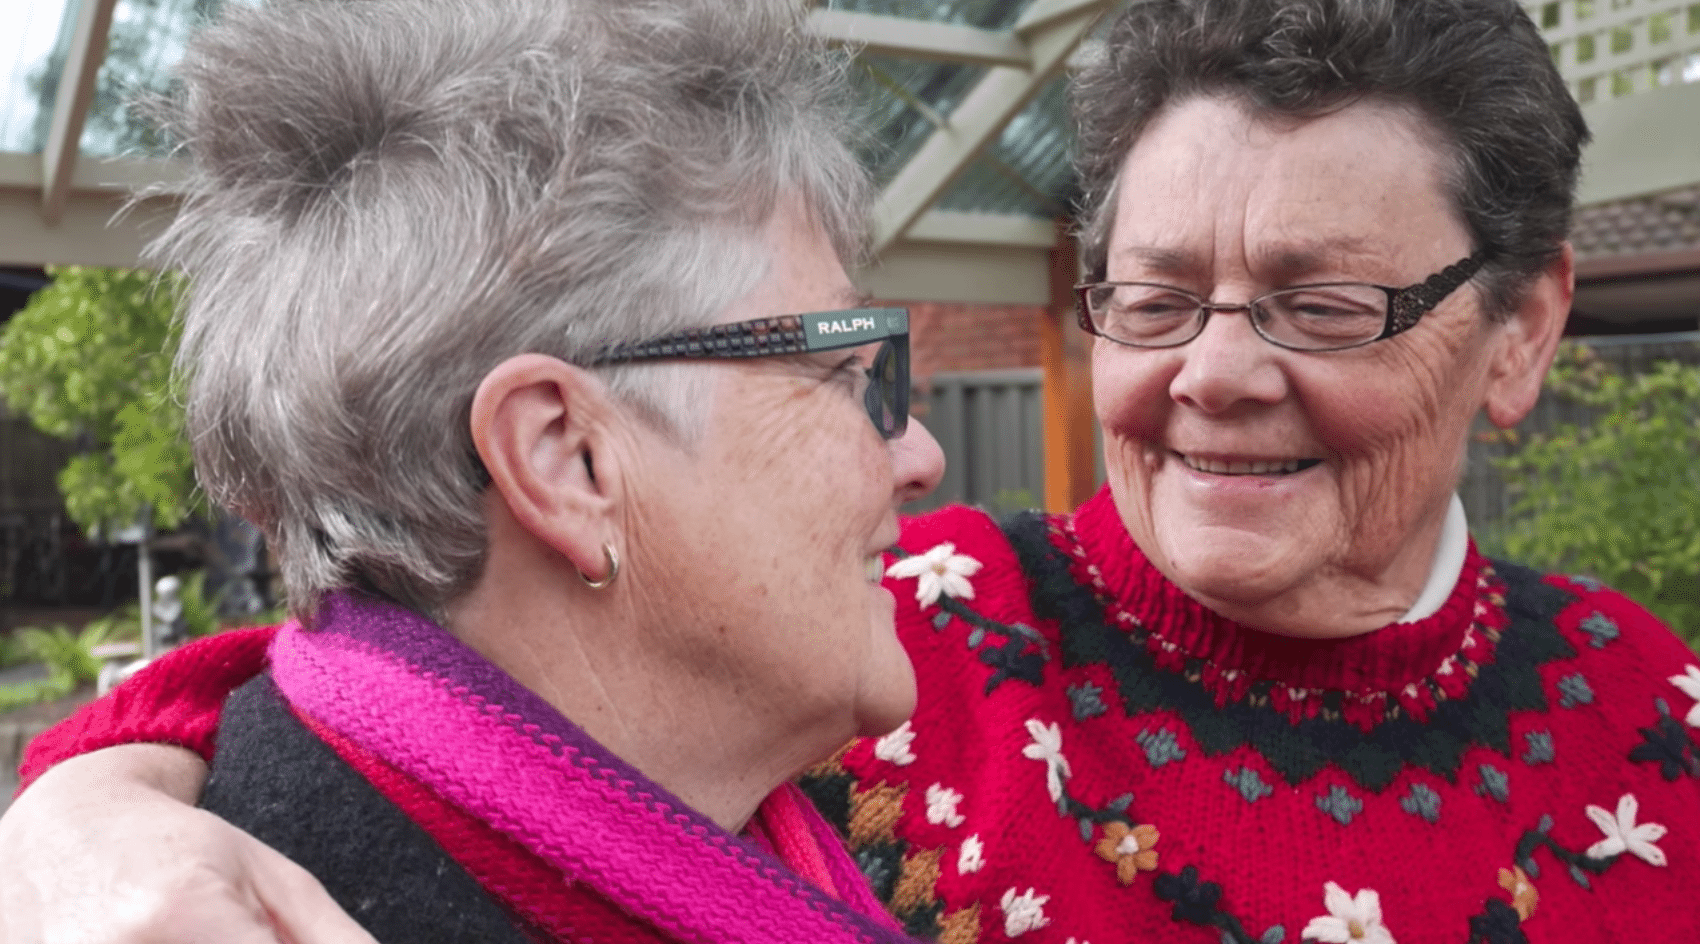 Dementia Australia to improve support for LGBTI people living with dementia